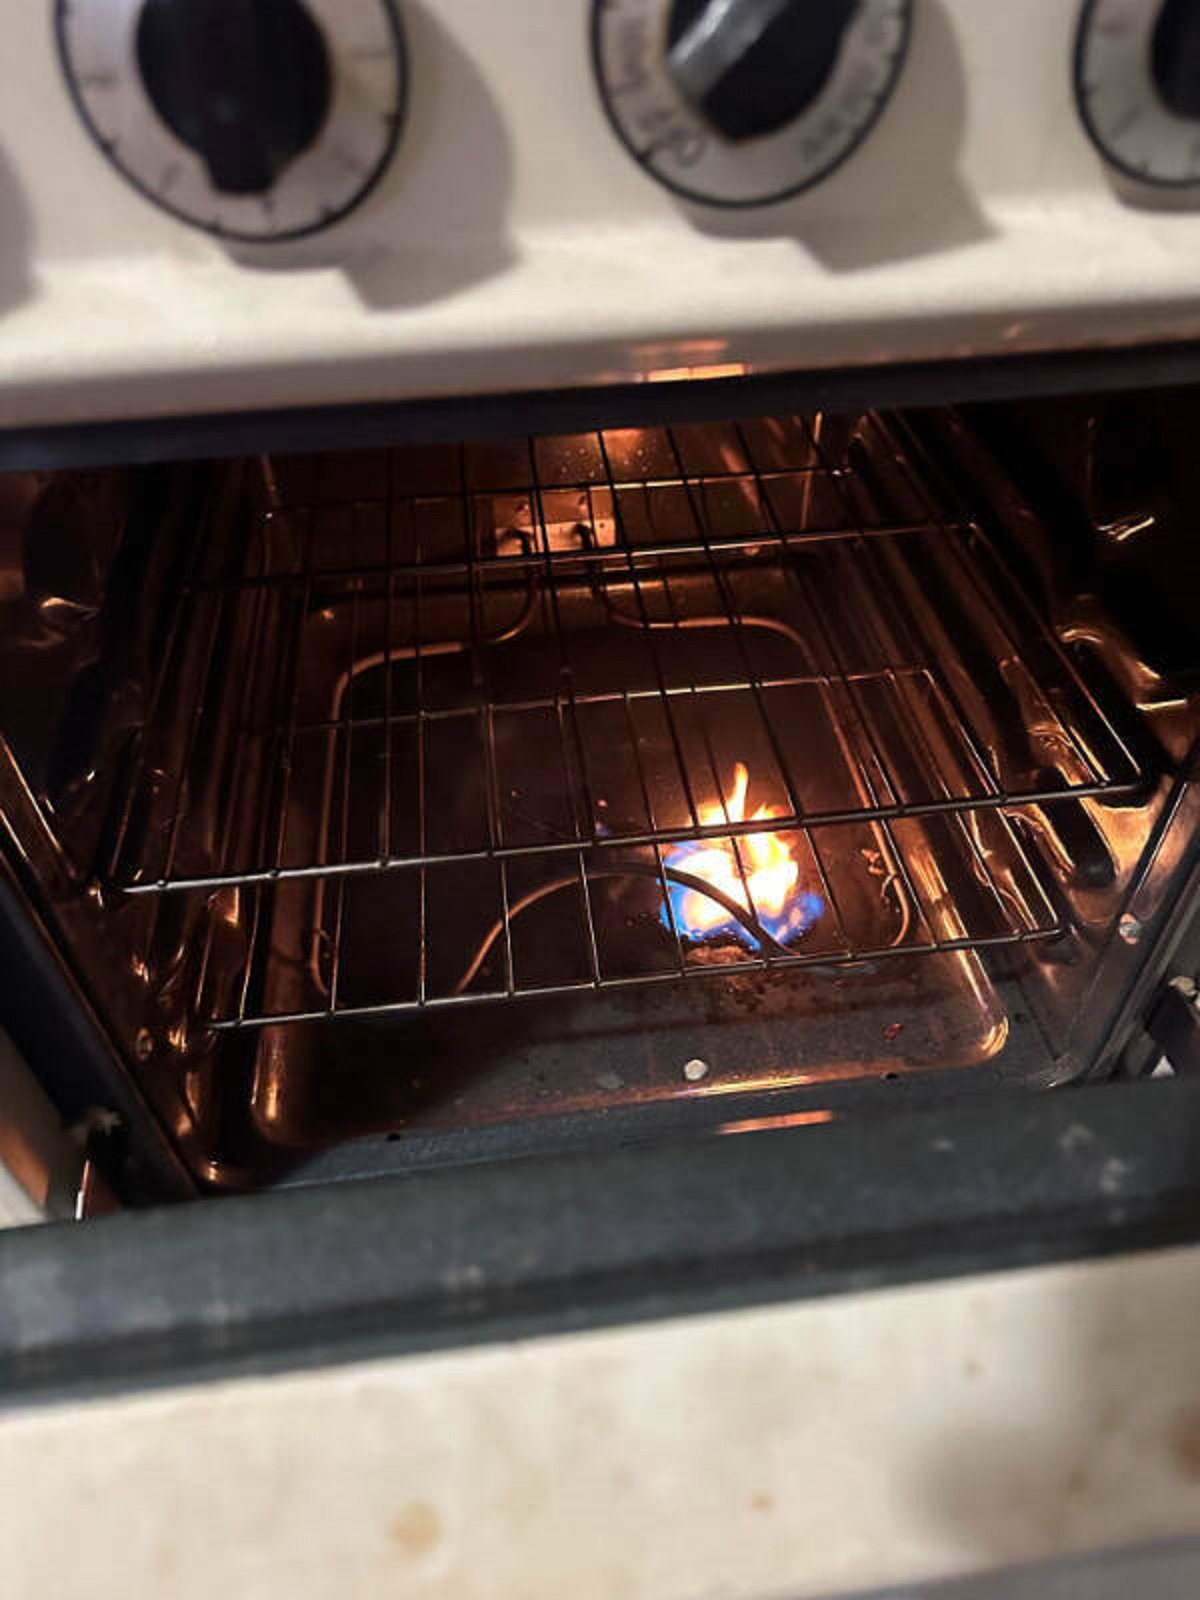 “Just moved to a new apartment and was so excited to make my first meal in my oven but the previous owner left a knife in there”